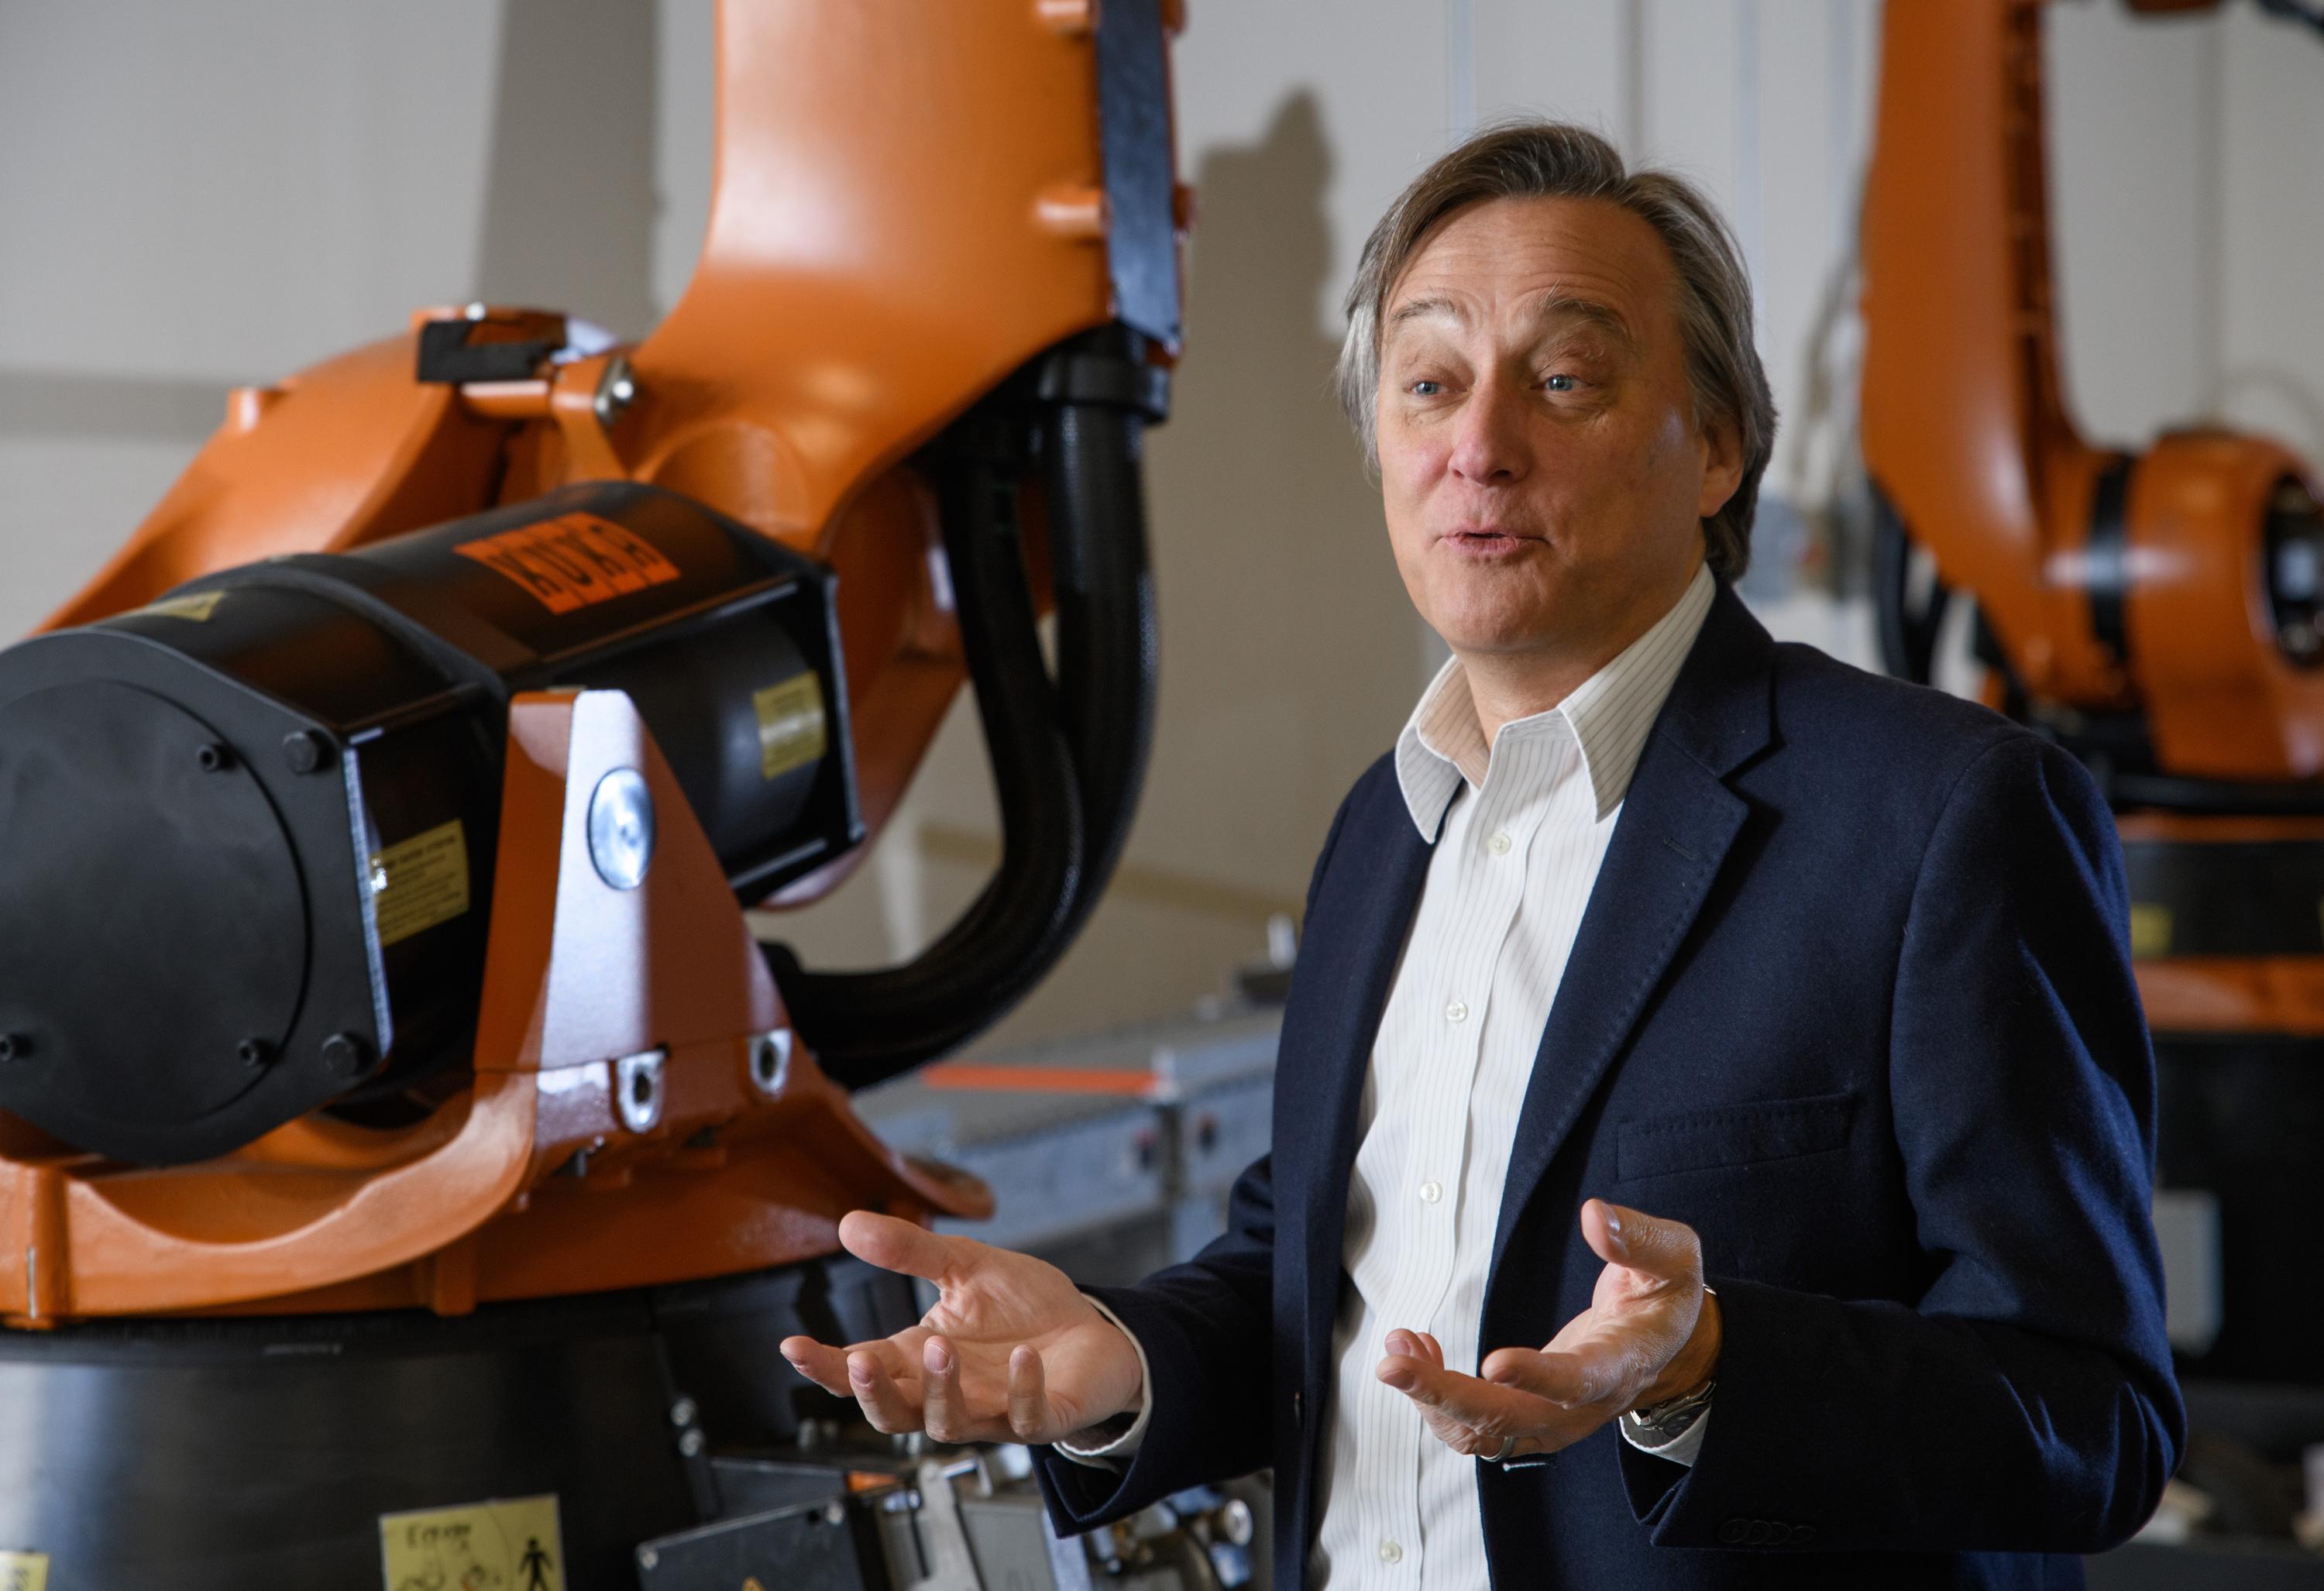 Seth Hutchinson has been named executive director of the Georgia Tech Institute for Robotics and Intelligent Machines (IRIM). Hutchinson is a professor and KUKA Chair for Robotics in Georgia Tech’s College of Computing. (Credit: Rob Felt, Georgia Tech)